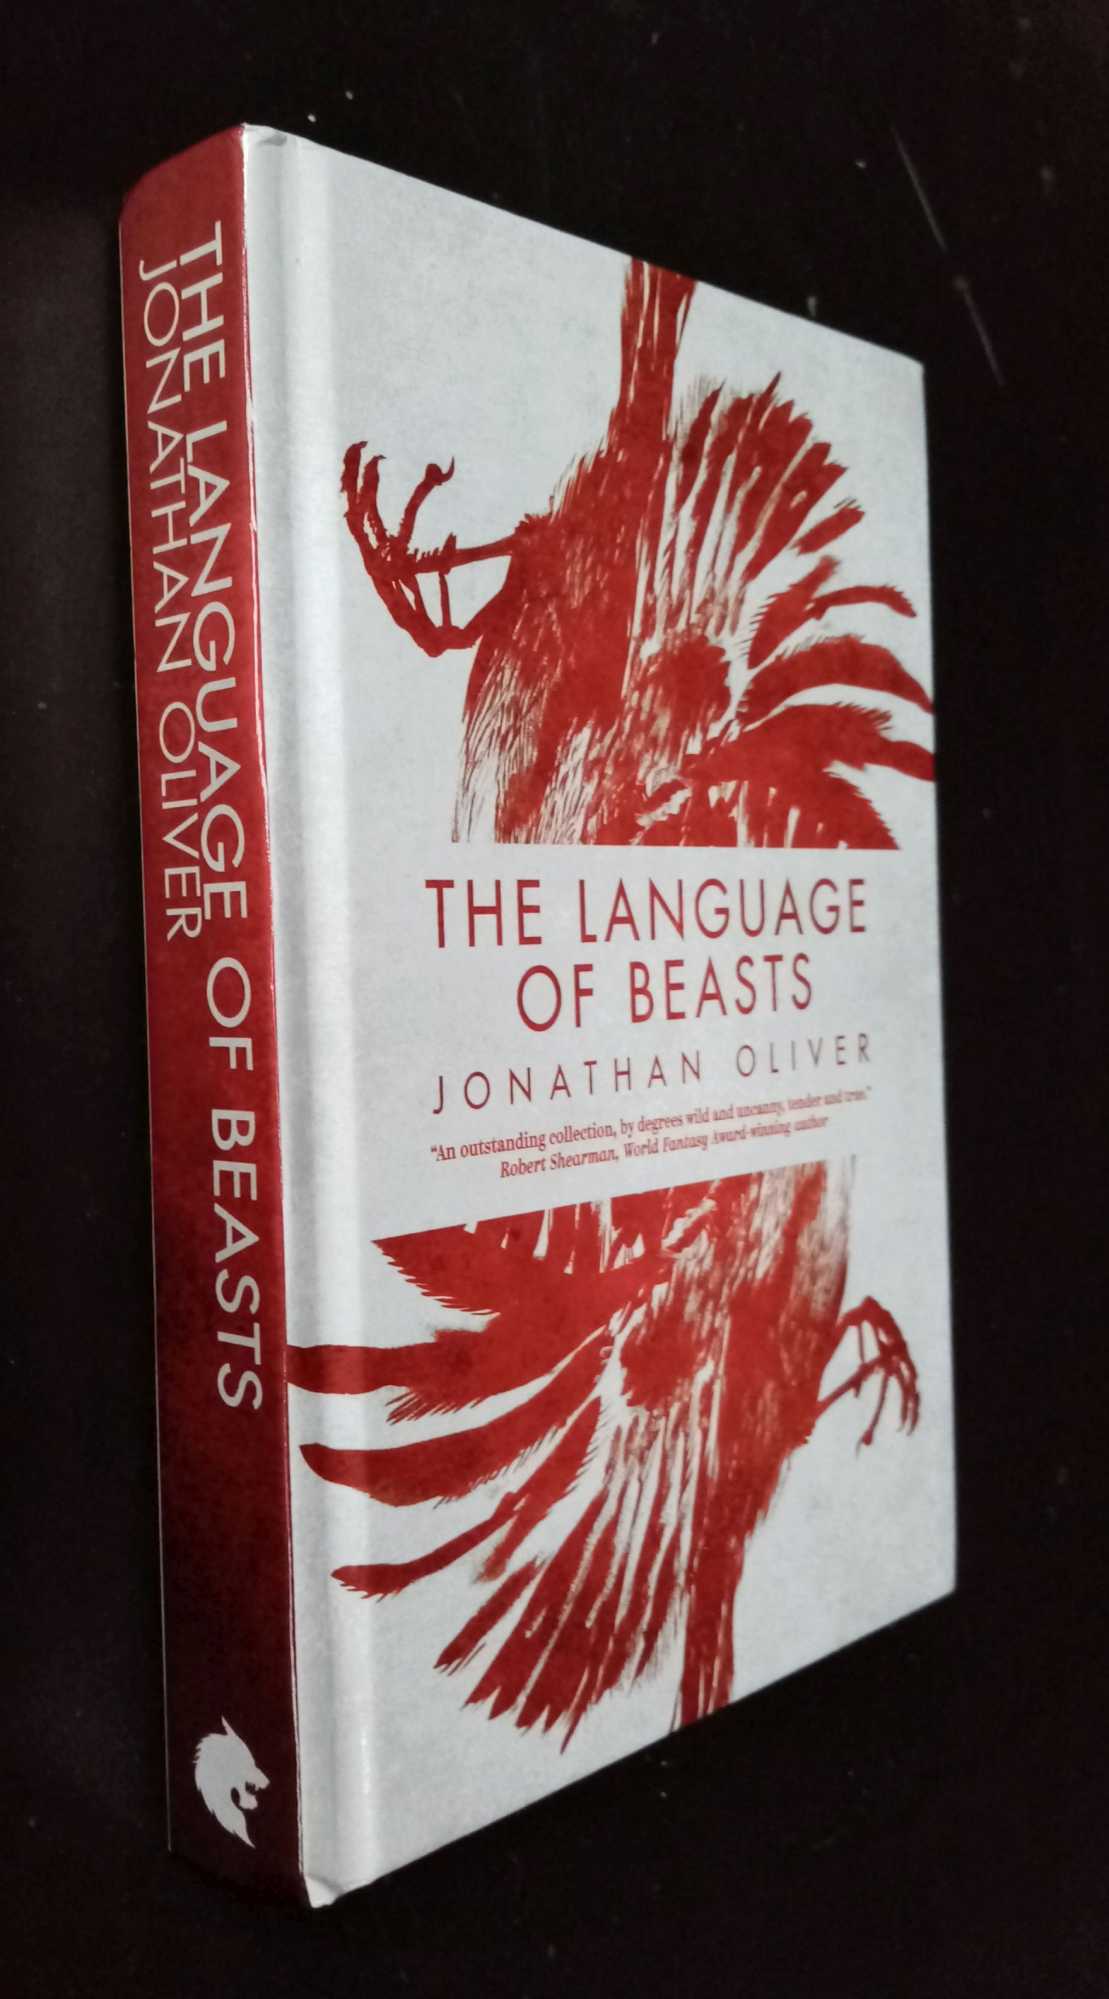 Jonathan Oliver - The Language of Beasts